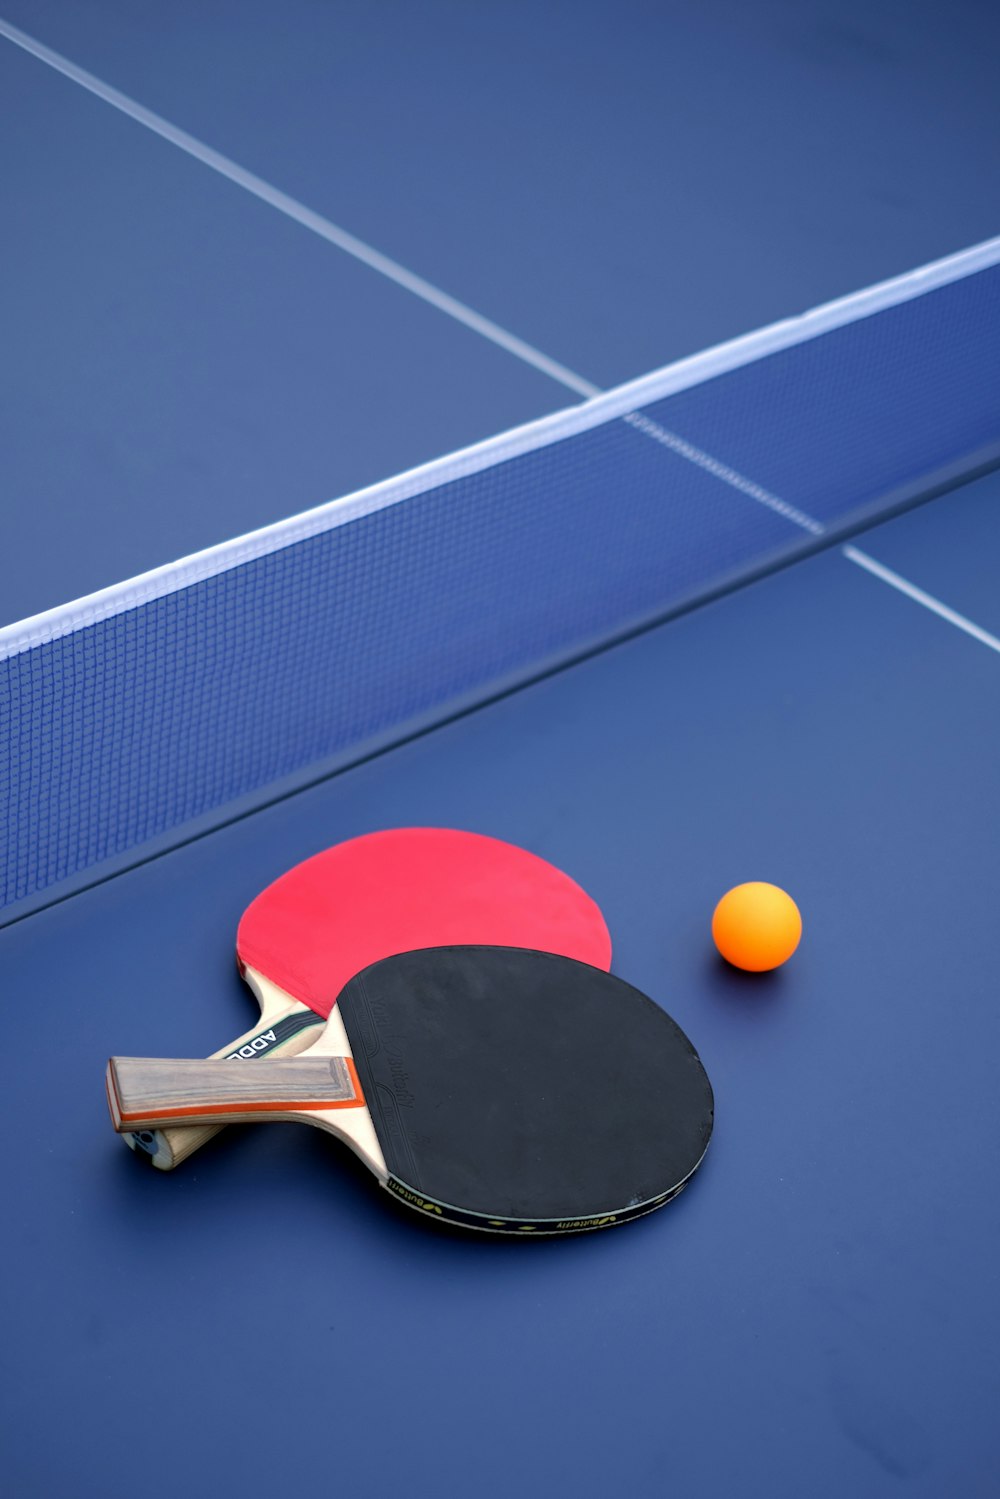 two ping pong paddles and an orange ball on a blue table